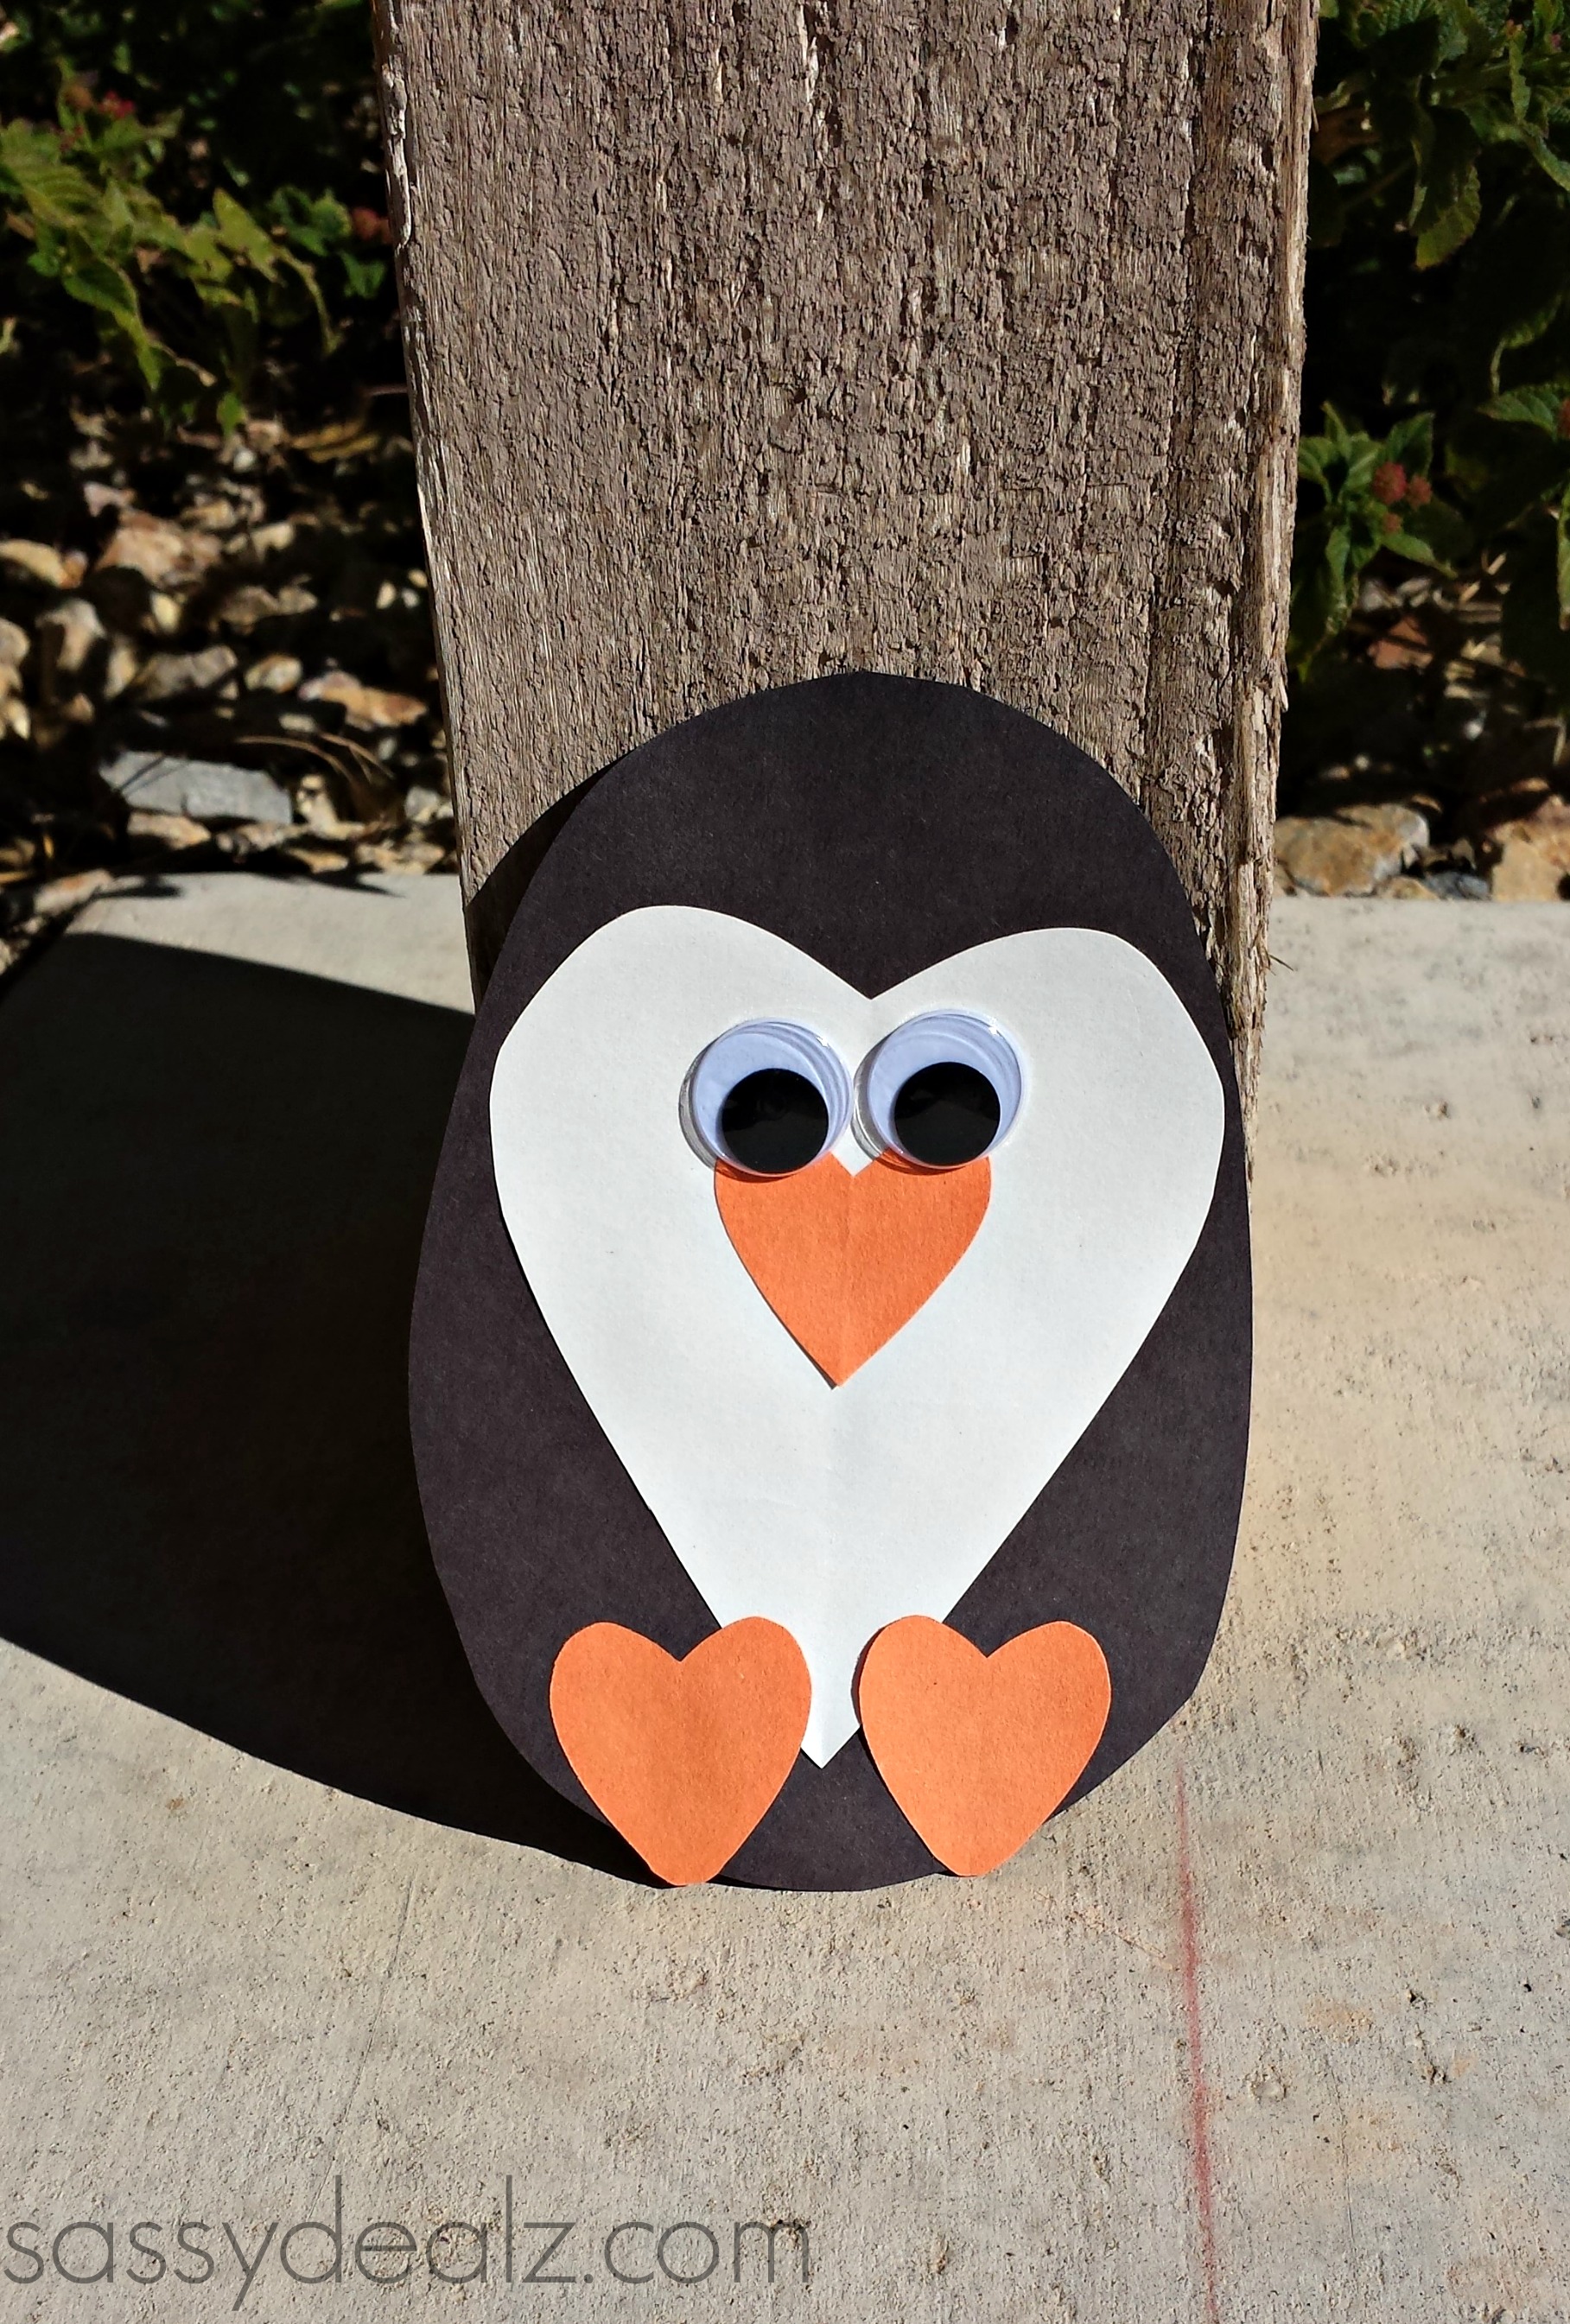 Paper Heart Penguin Craft For Kids - Crafty Morning